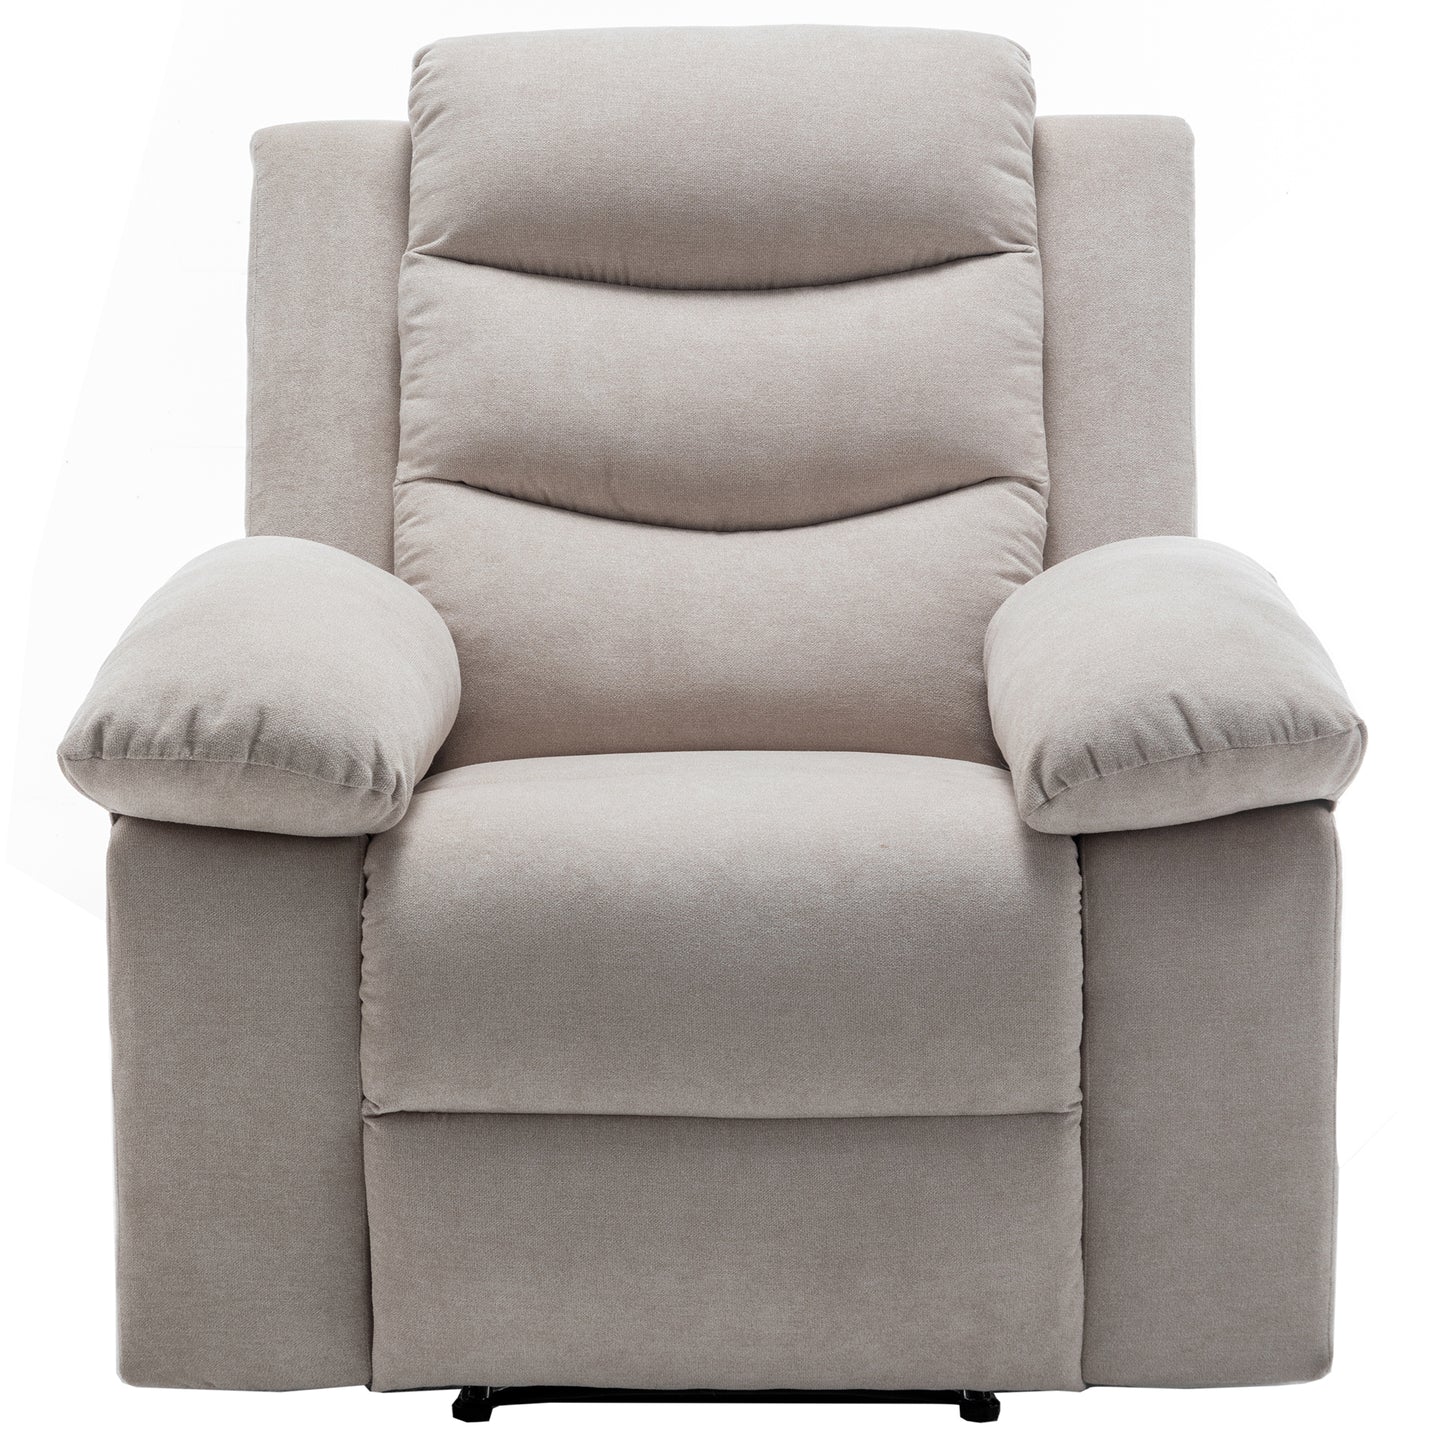 SYNGAR Electric Recliner Chair with Massage and Heating Function, Power Recliner Chair with Remote Control, Side Pockets, Armrest, Recliner Sofa Lounge Chair for Living Room Bedroom, Beige